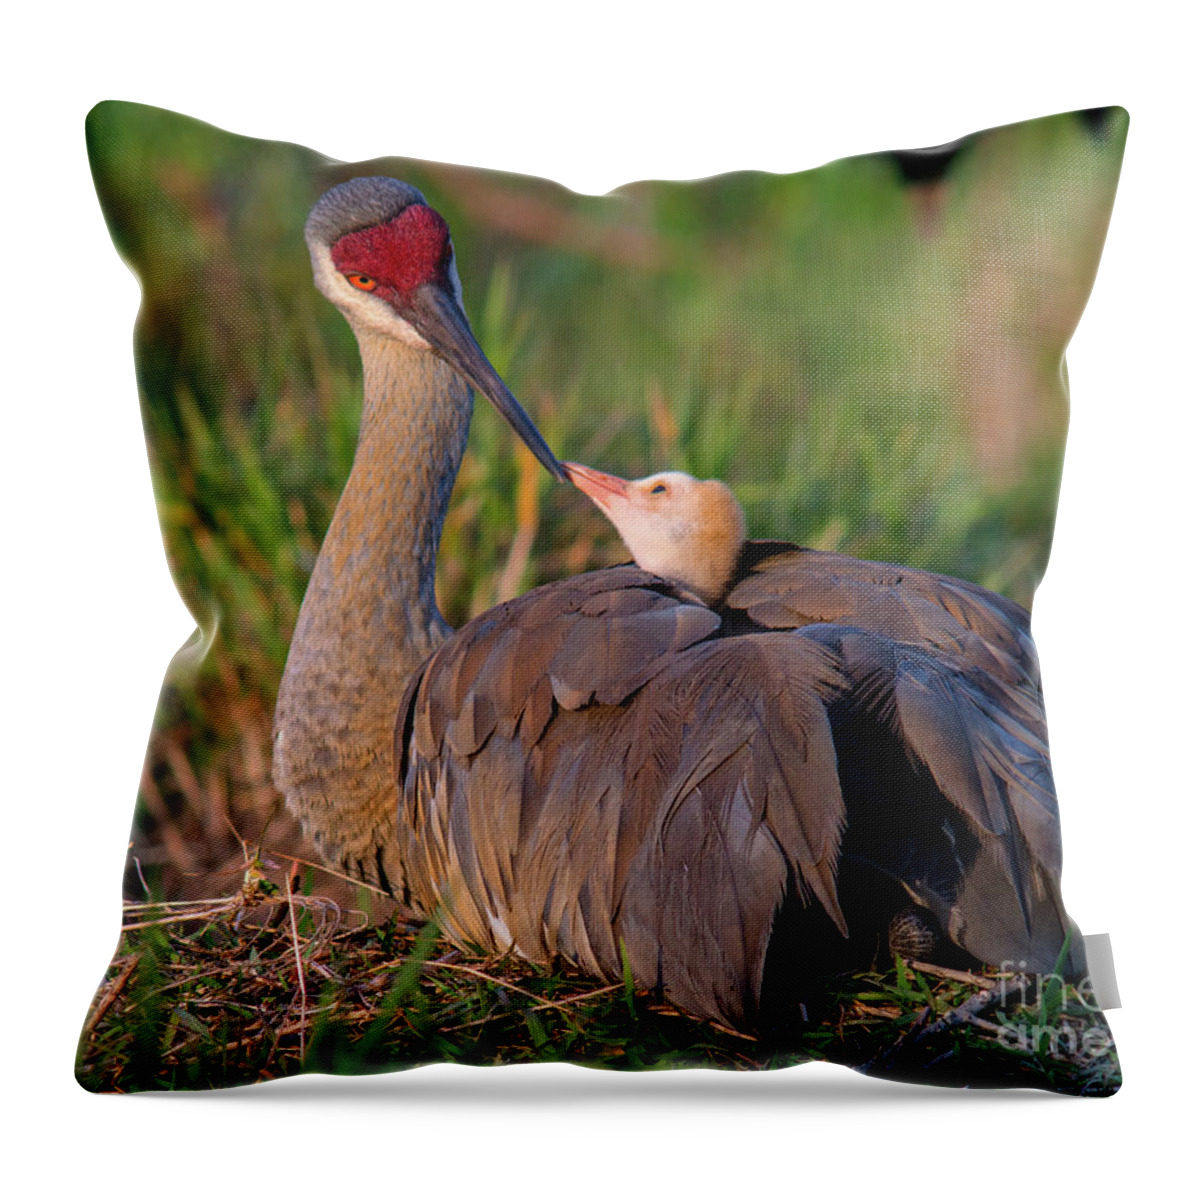 Sandhill Crane Throw Pillow featuring the photograph A Kiss Goodnight by Jane Axman